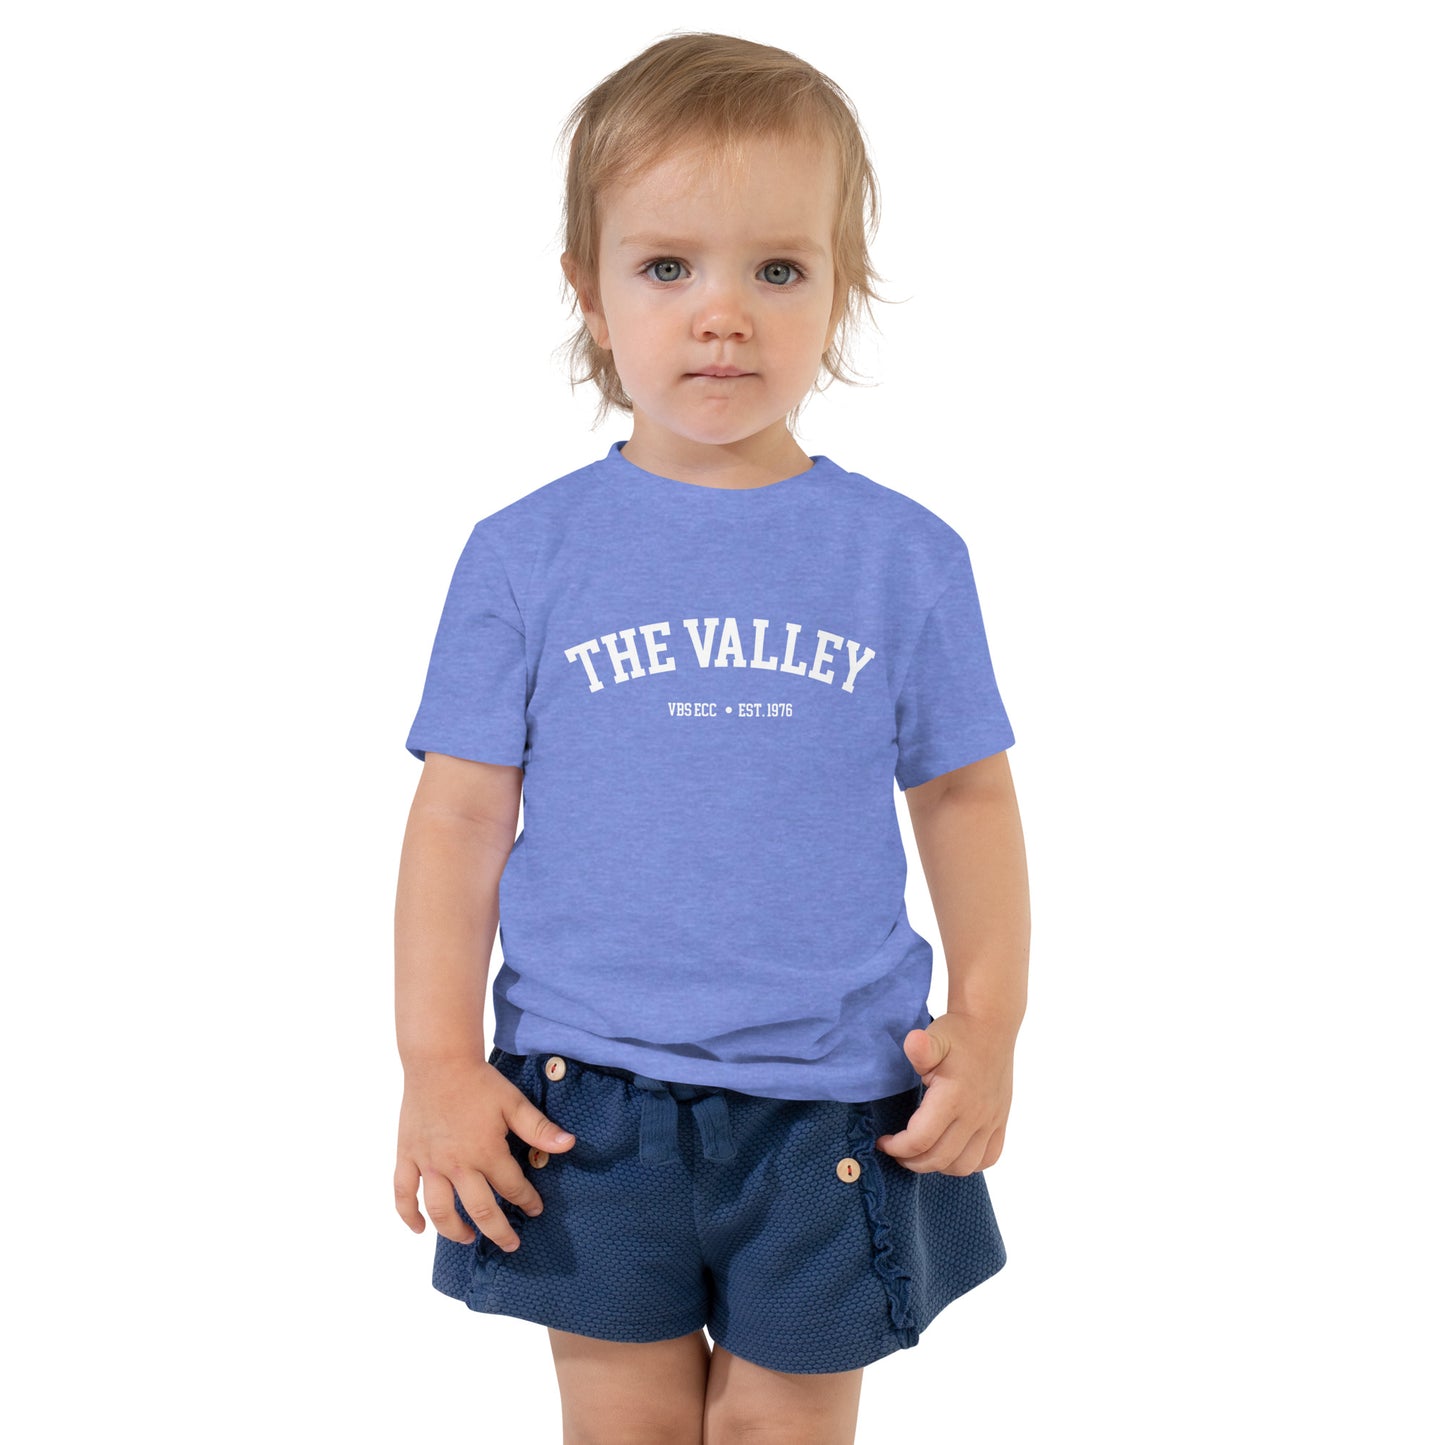 "The Valley" Toddler Short Sleeve Tee